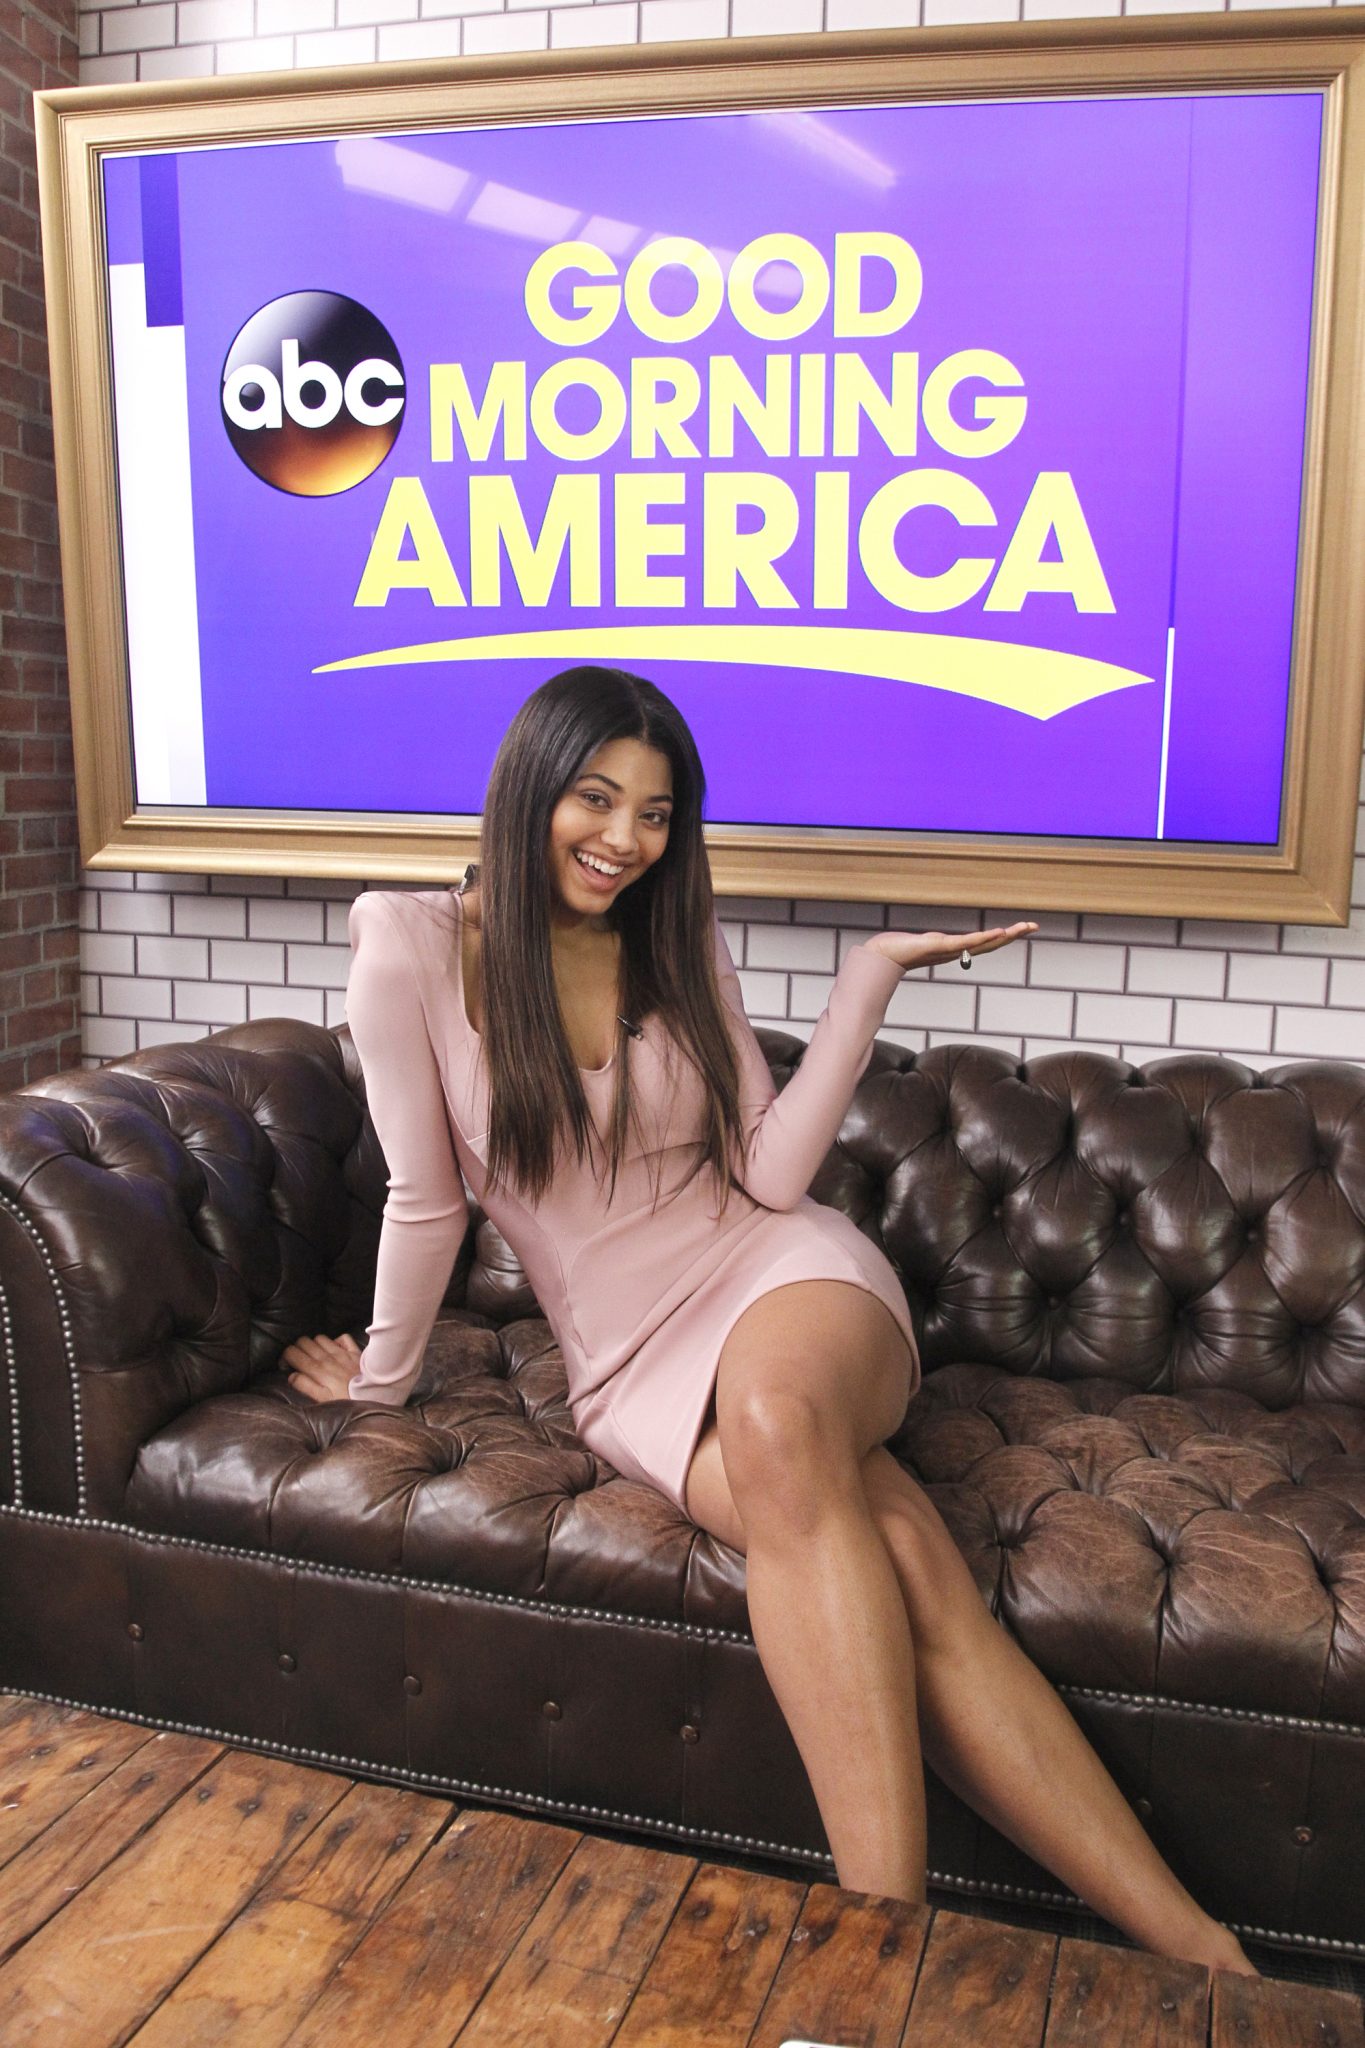 In Case You Missed It: Sports Illustrated Cover Model Danielle Herrington On GMA